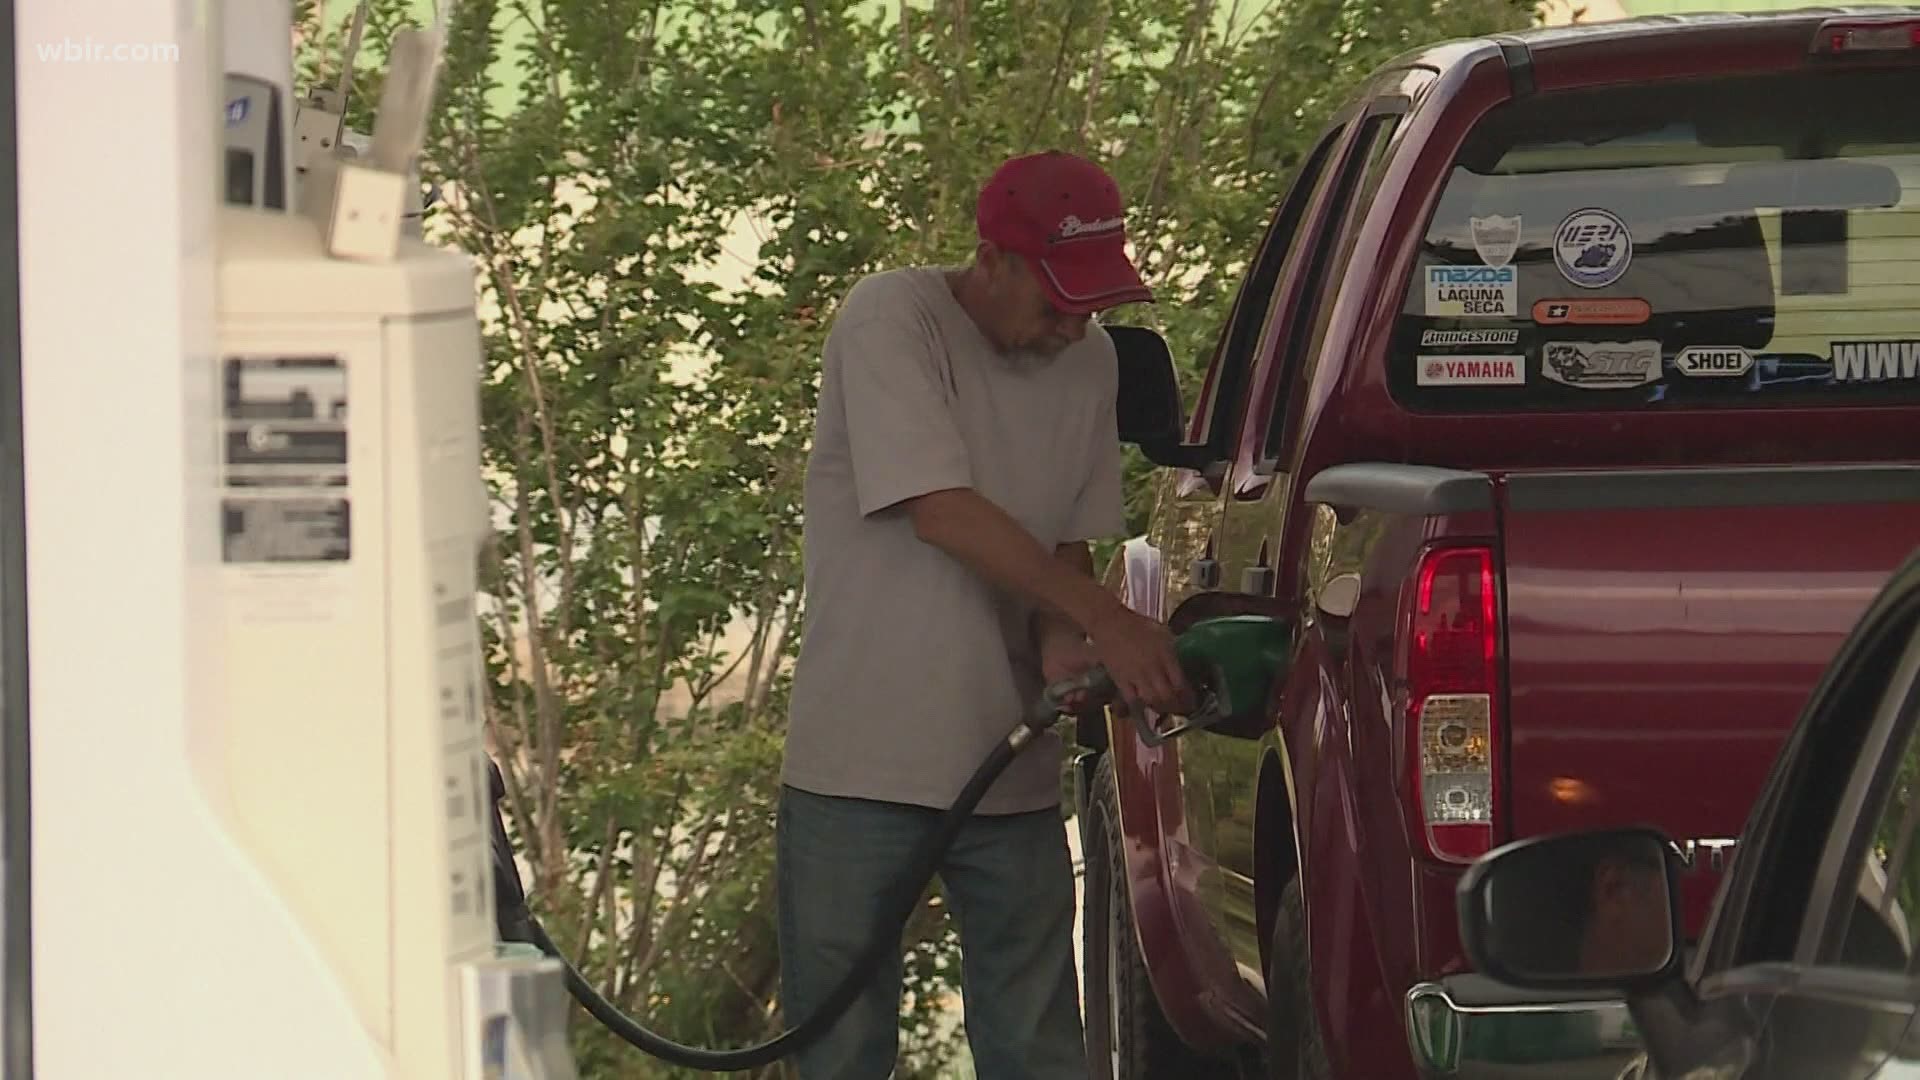 National average gas prices rose, Tennessee prices remain lower than average.